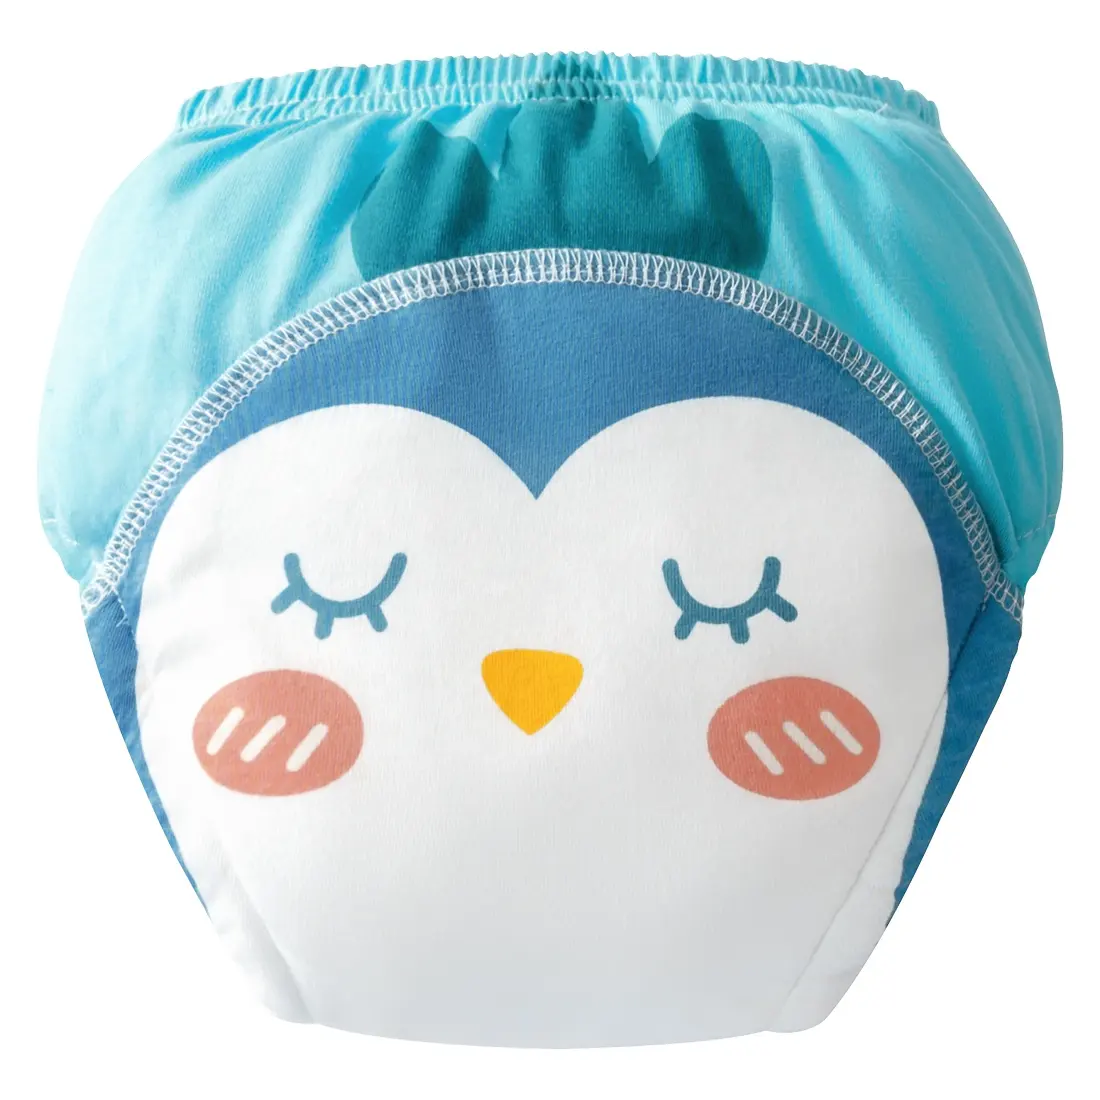 Baby potty training pants unisex diapers for babies and children washable underwear no diaper